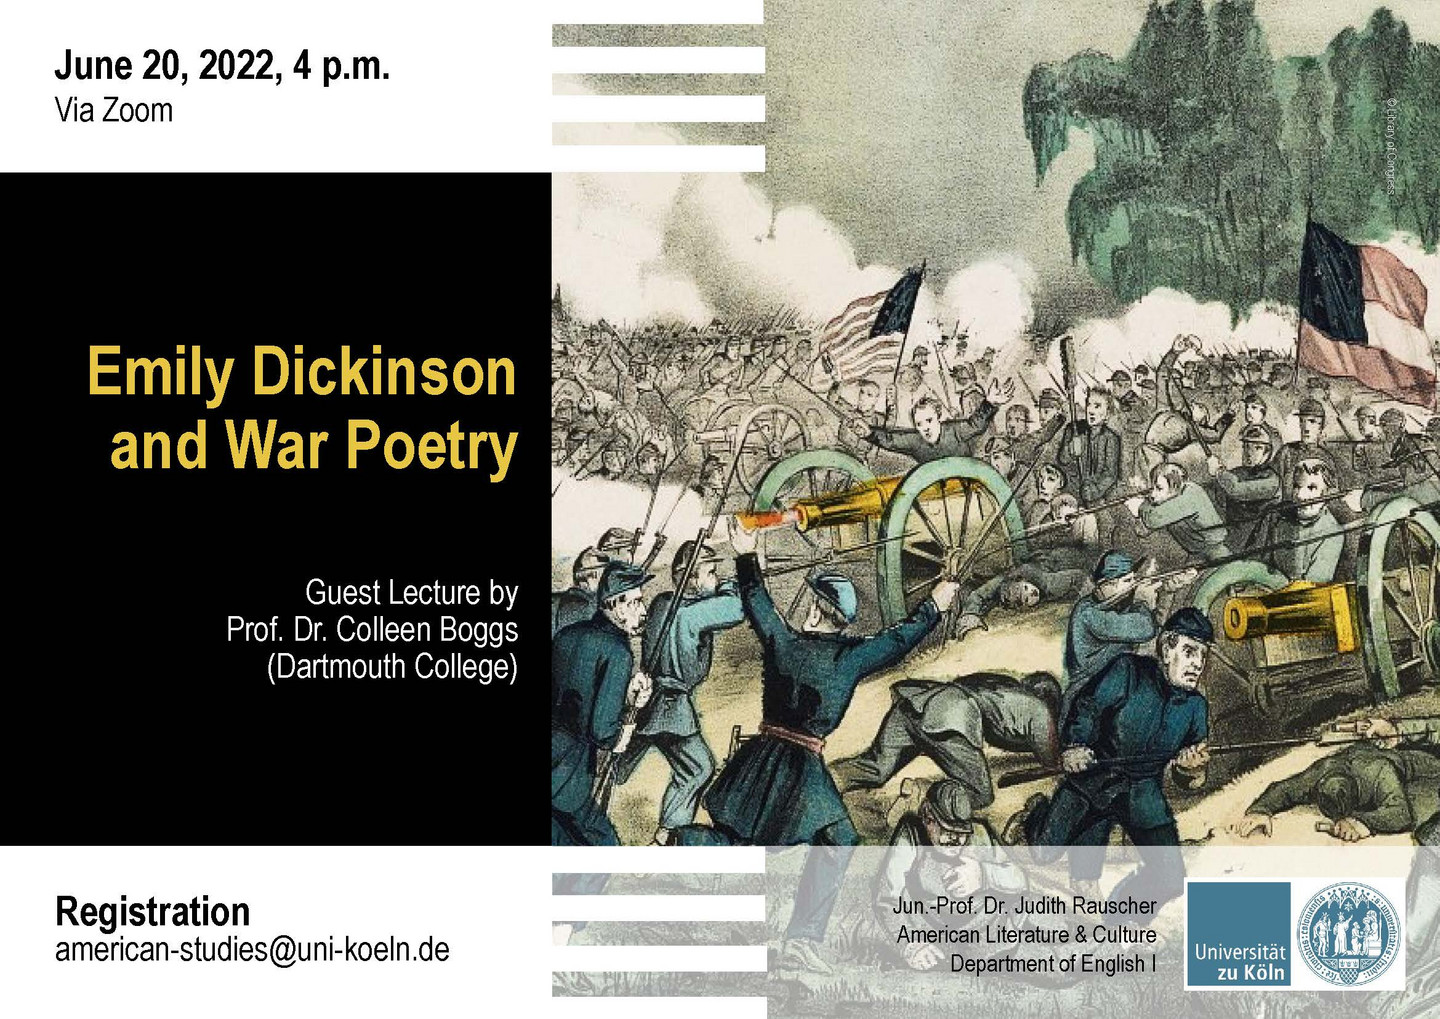 Poster of the Guest Lecture "Emily Dickinson and War Poetry" featuring a painted scene of the Battle of Gettysburg